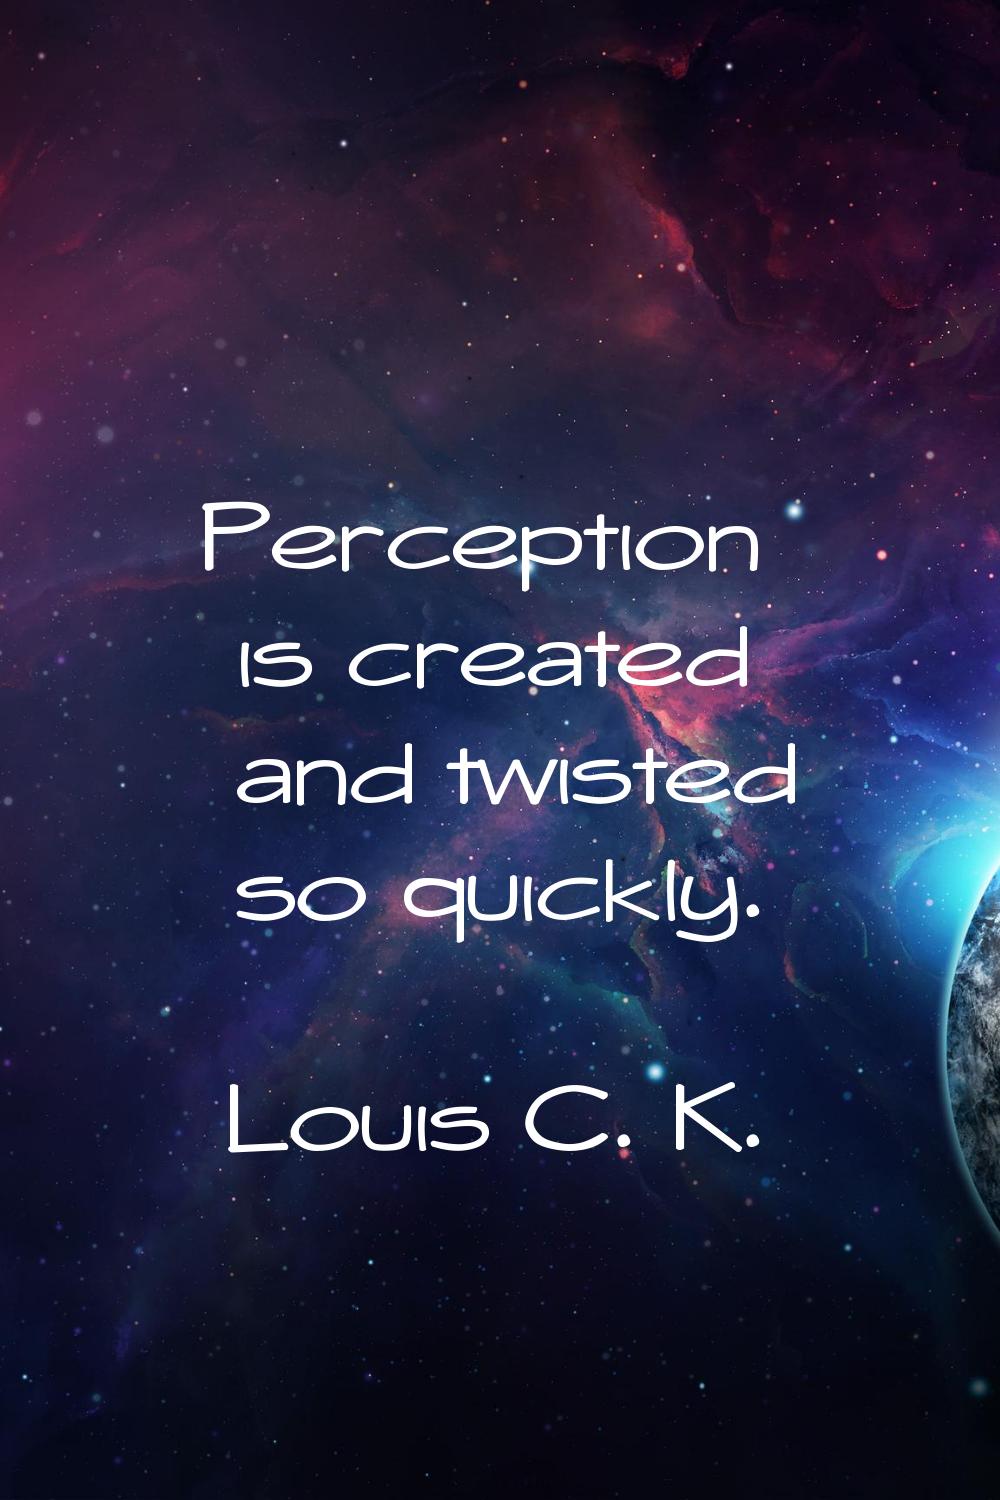 Perception is created and twisted so quickly.